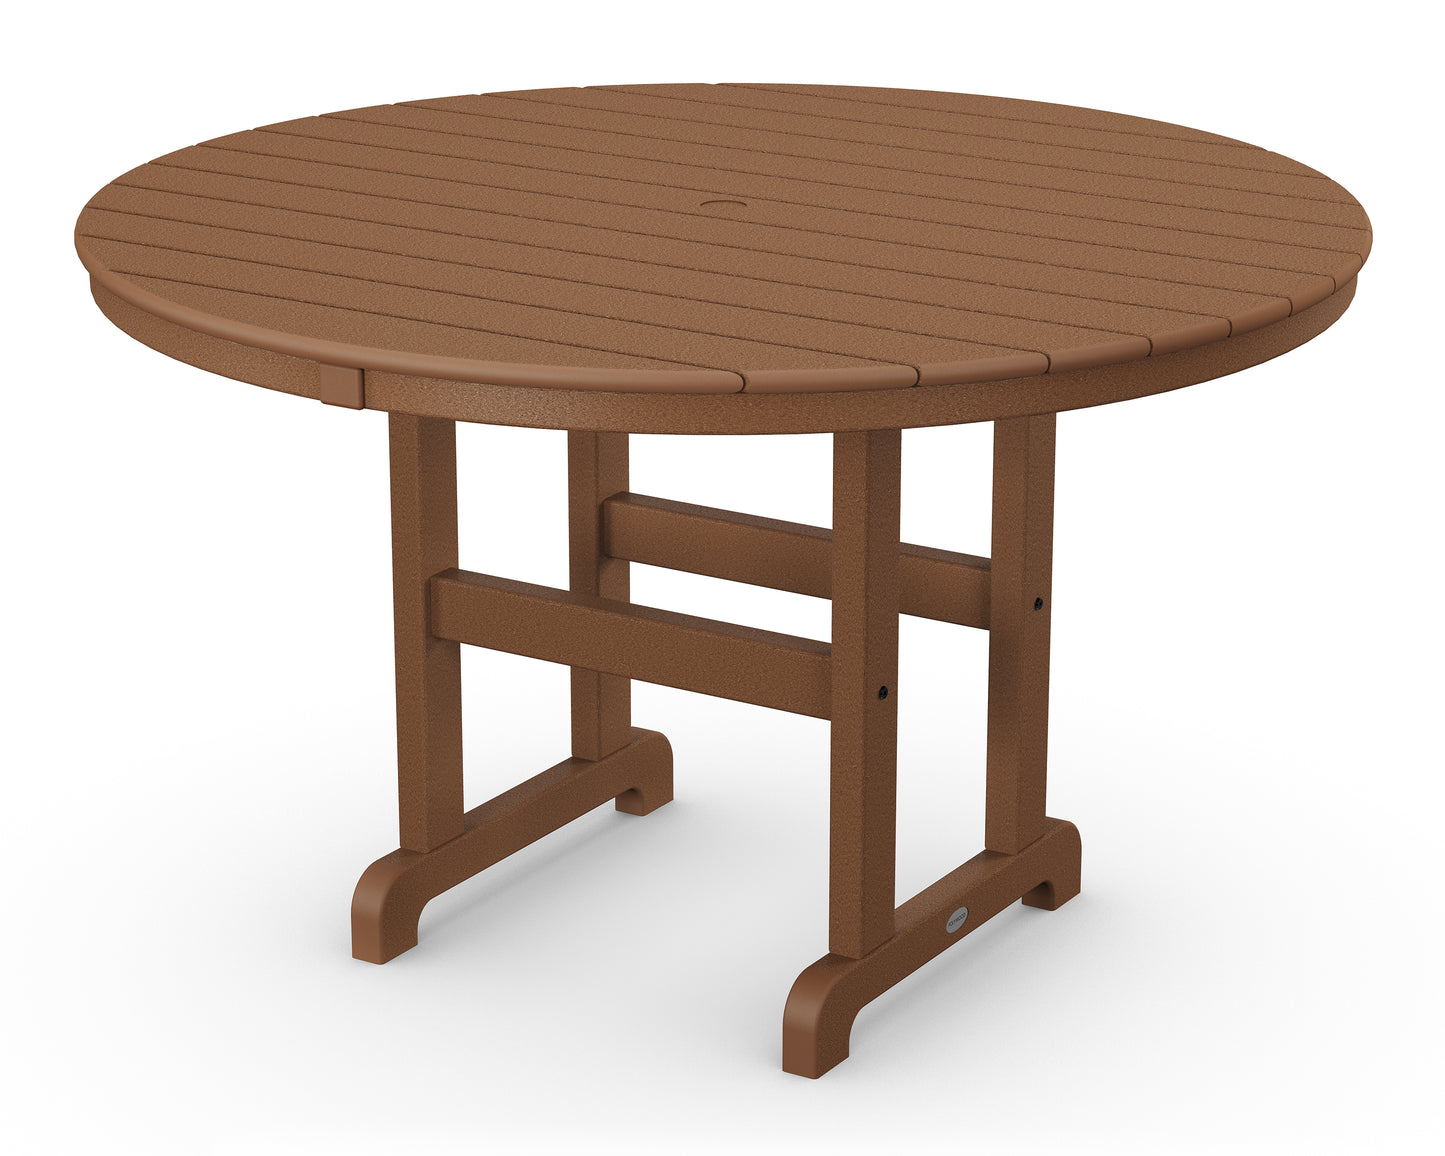 Polywood 48" Round Dining Table